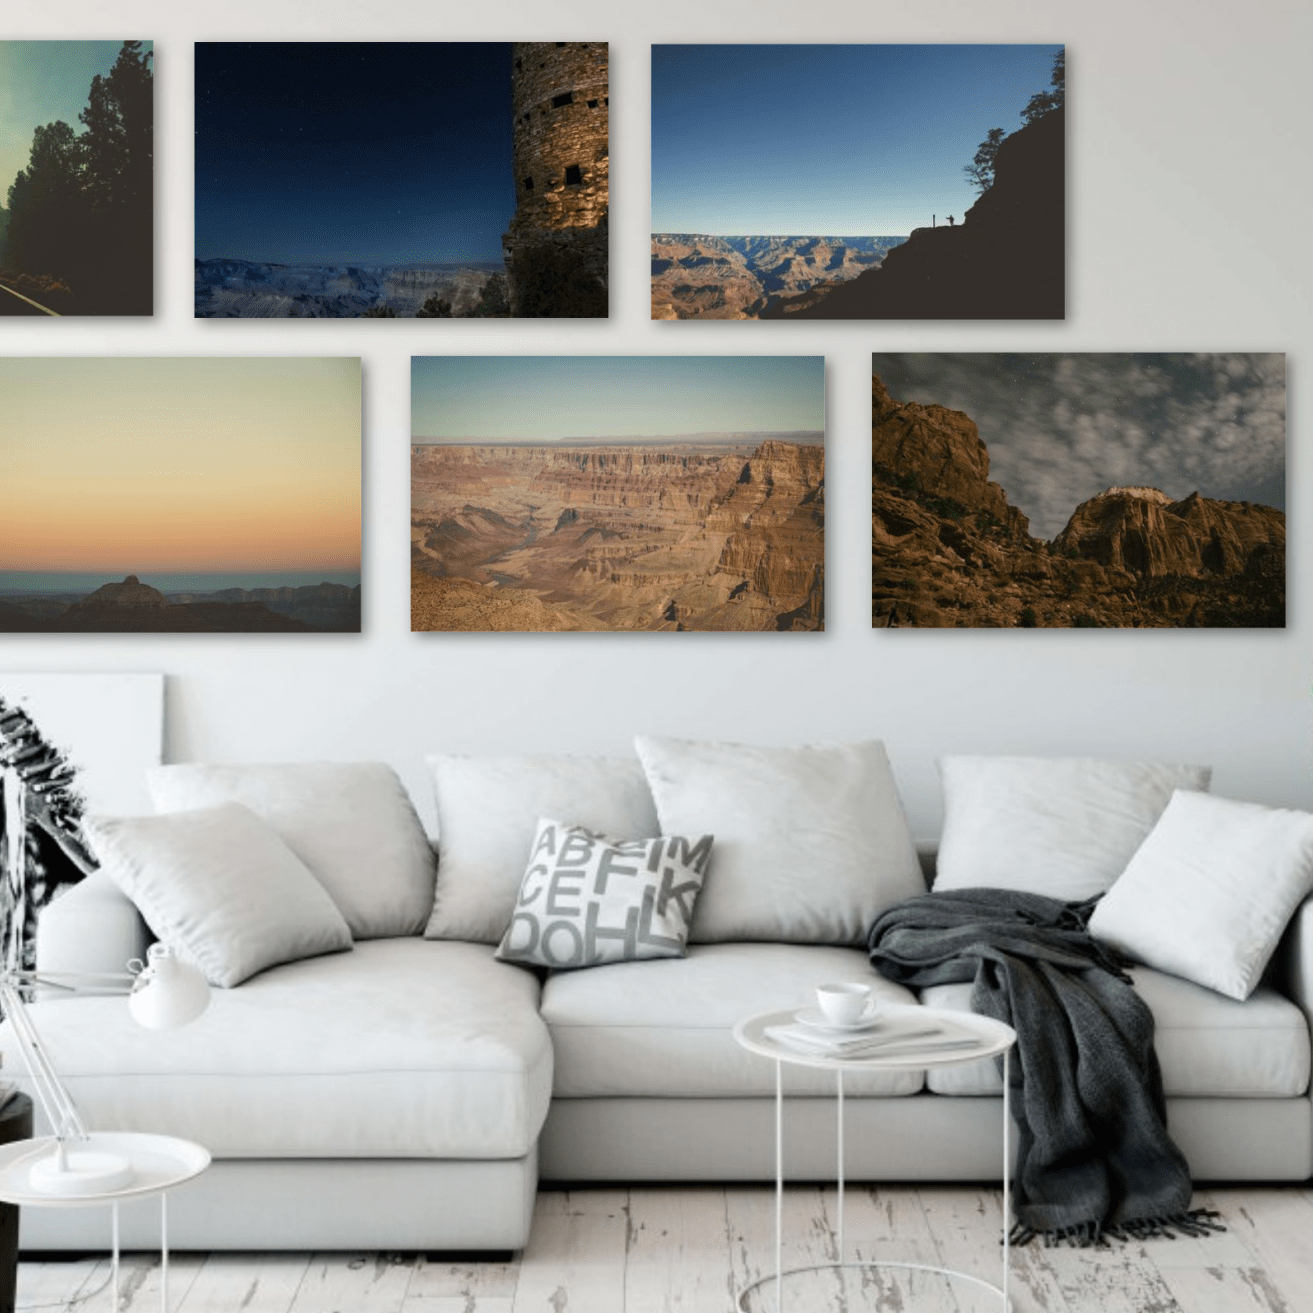 Six fine art wall pieces of images of the Grand Canyon and Zion National park displayed above a couch